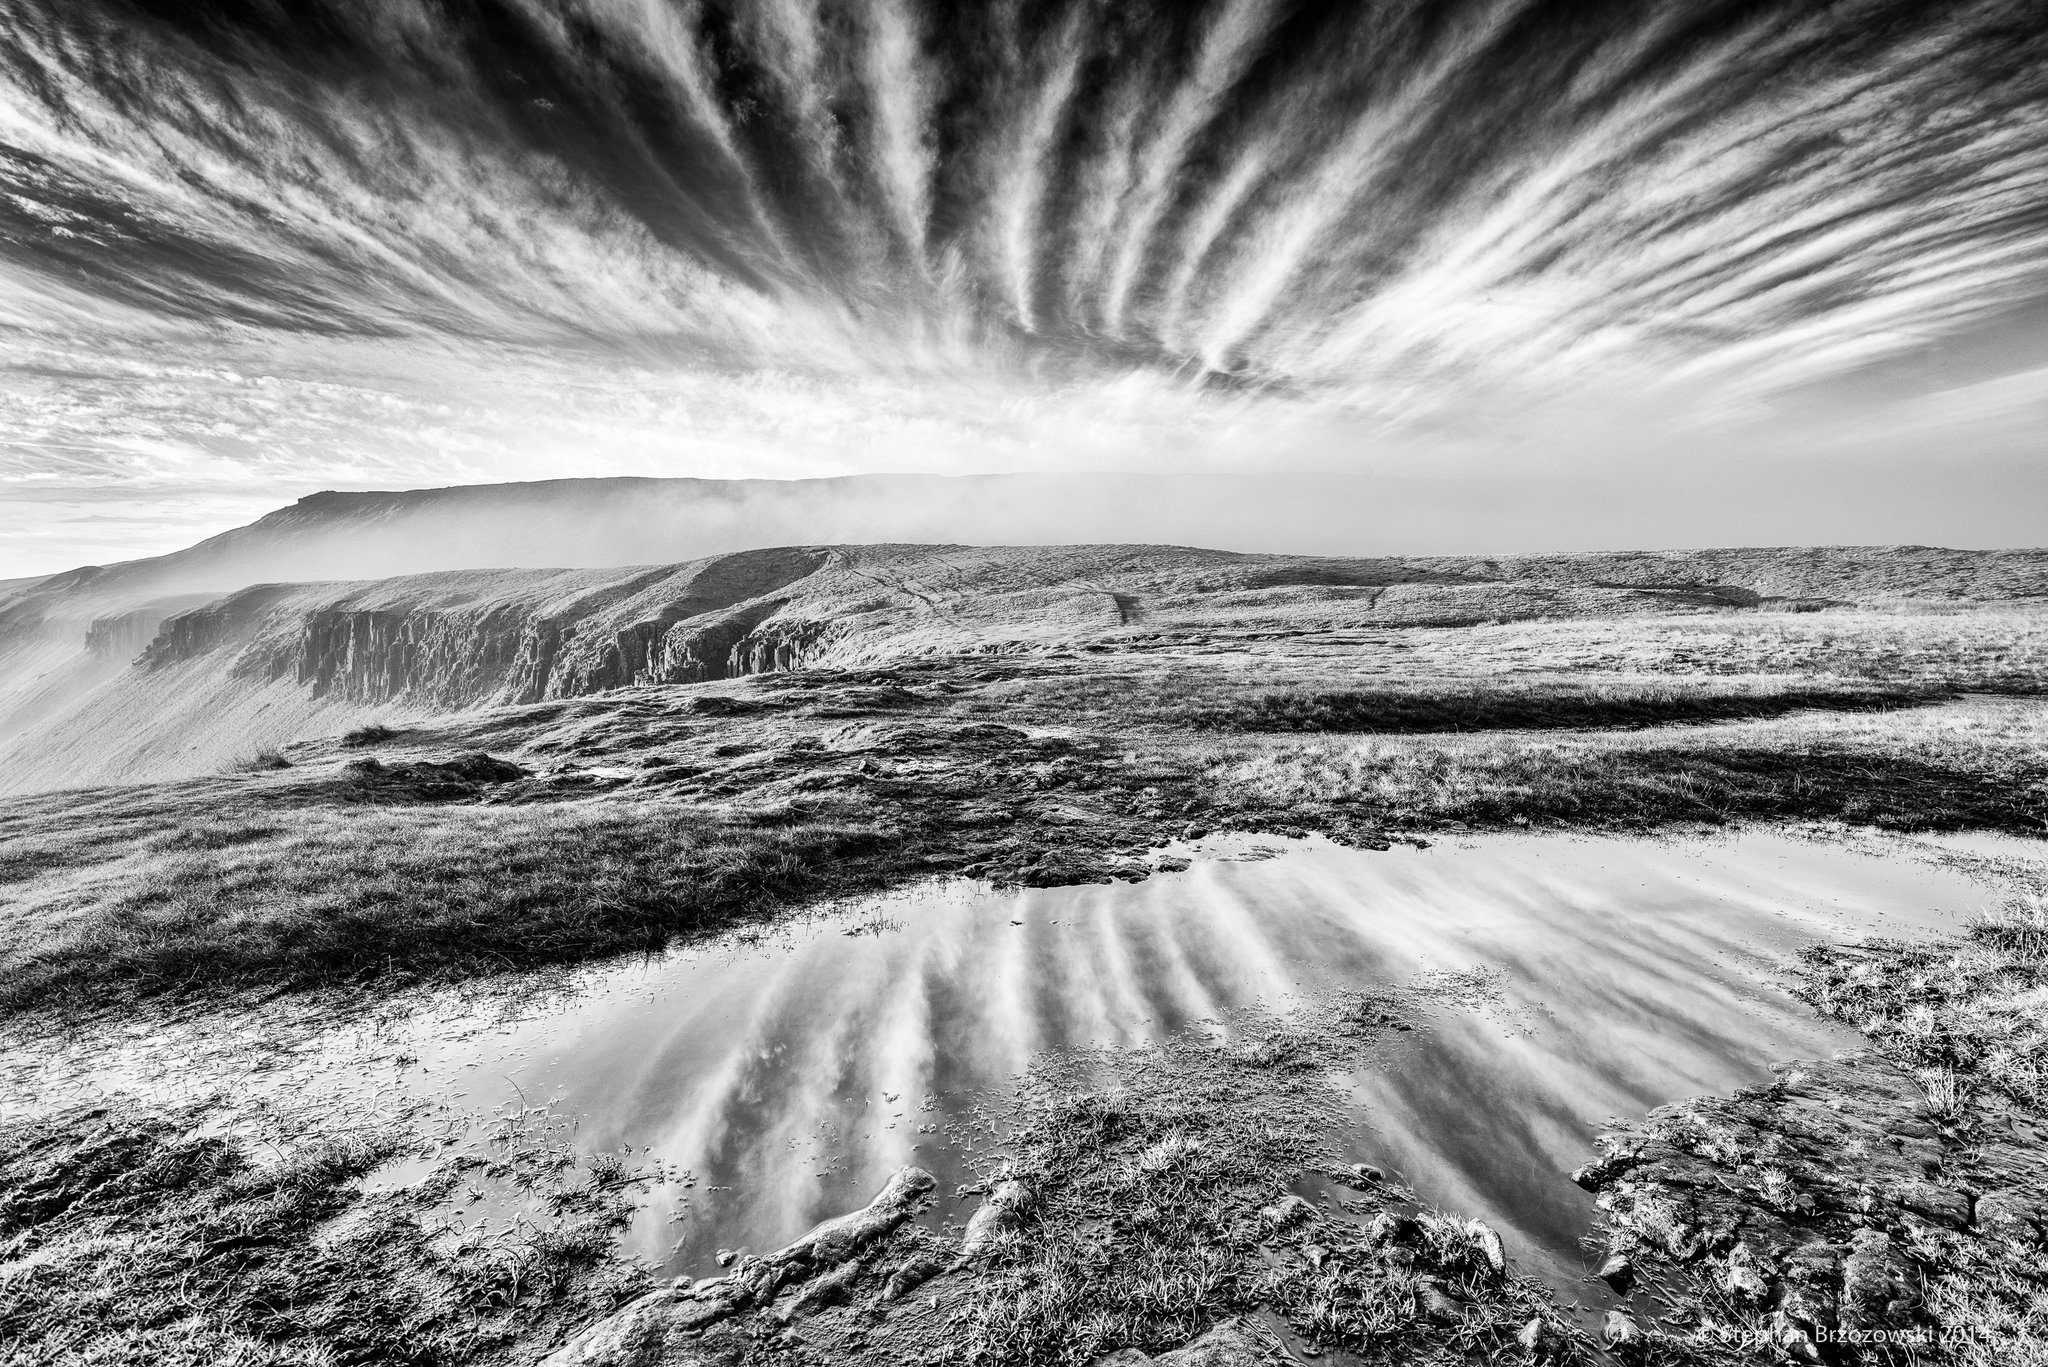 3rd Place Fan-shaped display of cirrus cloud over High Cup Nick in the North Pennines of Cumbria by Stephan Brzozowski @stephanbrz